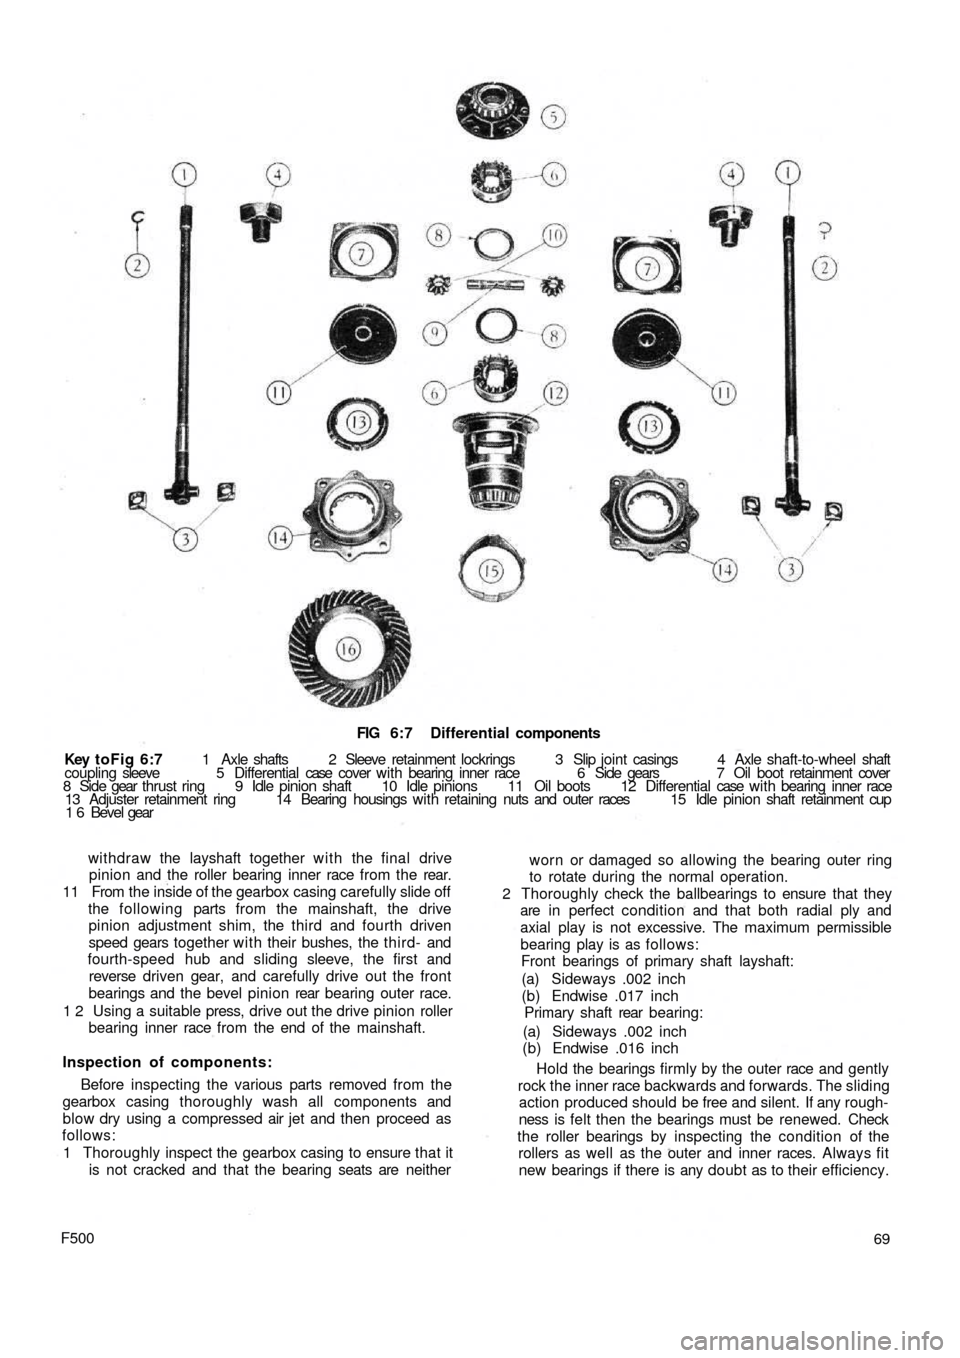 FIAT 500 1971 1.G Workshop Manual FIG 6:7  Differential components
Key toFig  6:7 1  Axle  shafts  2  Sleeve  retainment  lockrings   3   Slip  joint casings  4  Axle  shaft-to-wheel shaft
coupling sleeve  5  Differential case  cover 